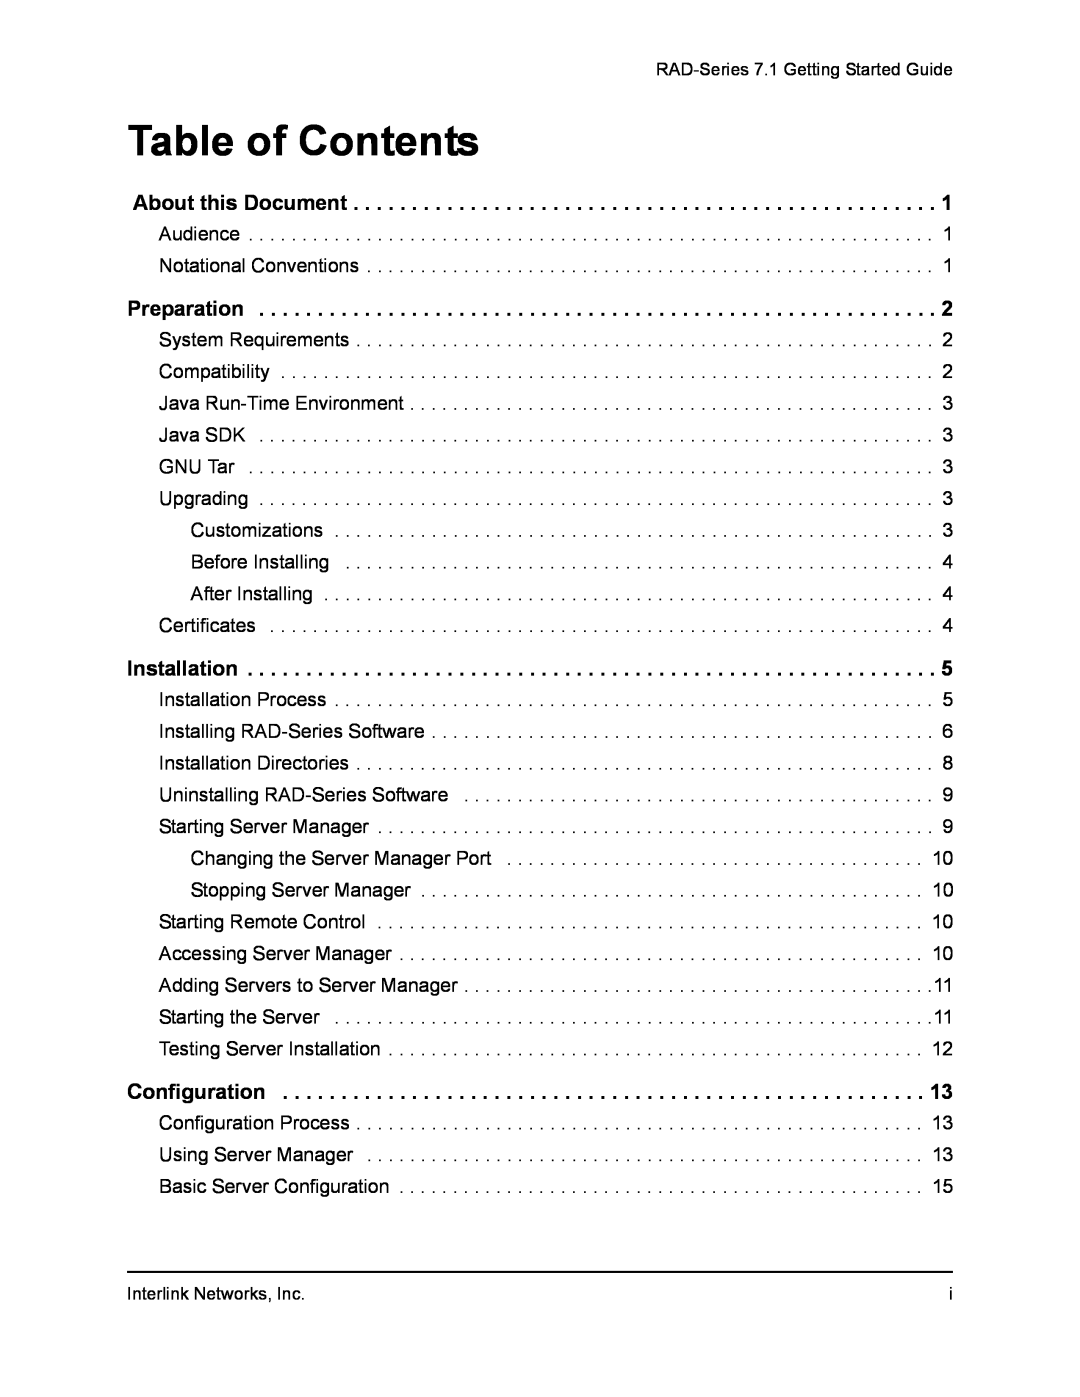 Interlink electronic 7.1 manual Table of Contents, About this Document, Preparation, Installation, Configuration 